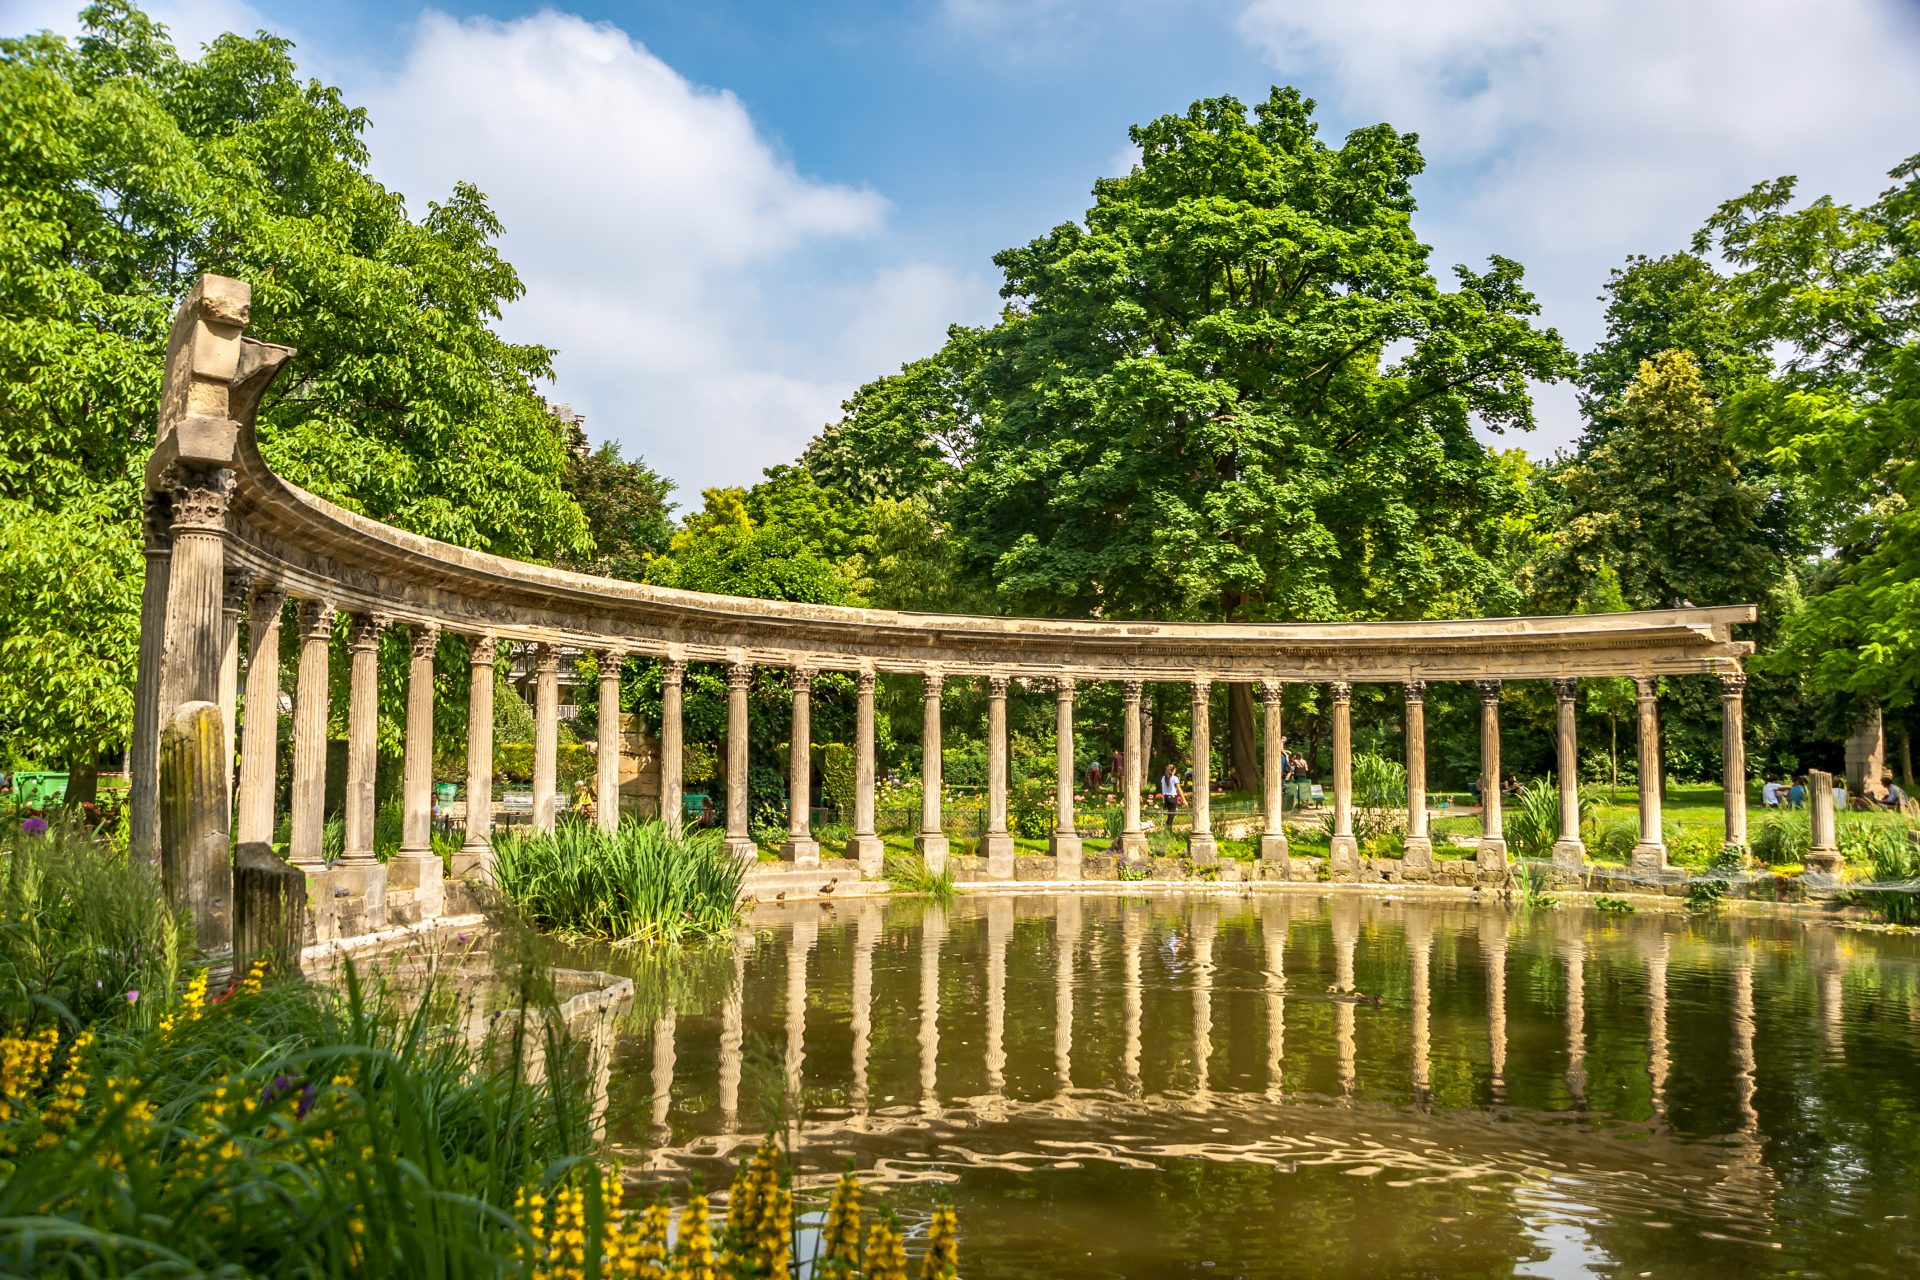 <p>In the 8th arrondissement, Parc Monceau is a haven of peace and elegance. Built in the 18th century in an Anglo-Chinese style, it's considered the "chicest" of Parisian parks. Its architecture and greenery inspired the French artist Claude Monet, who painted it six times.</p>